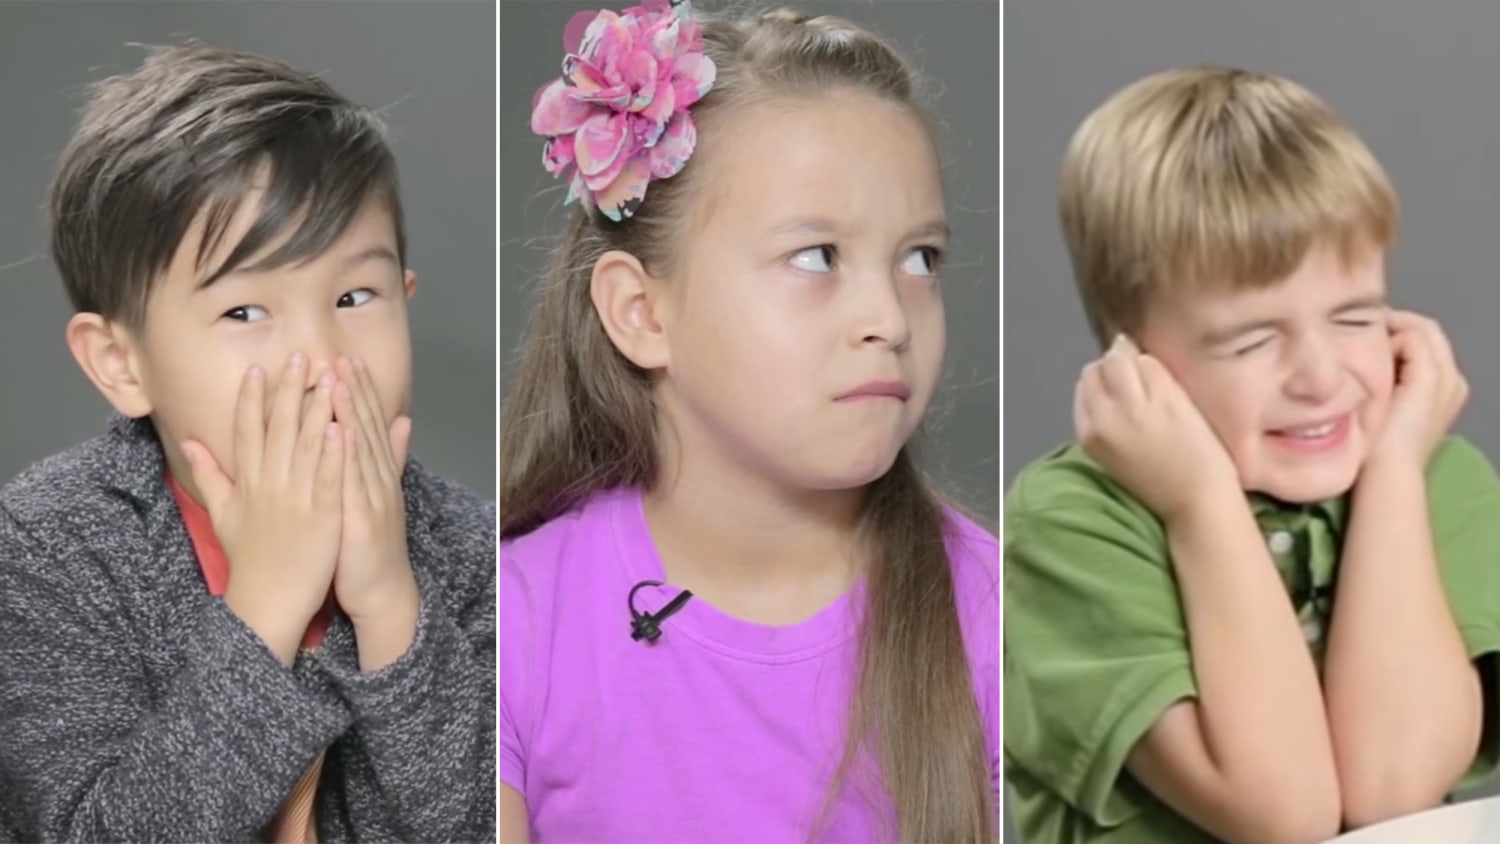 Mom In Bath Son To Force Sex - Parents try to explain sex to kids and the reactions are priceless